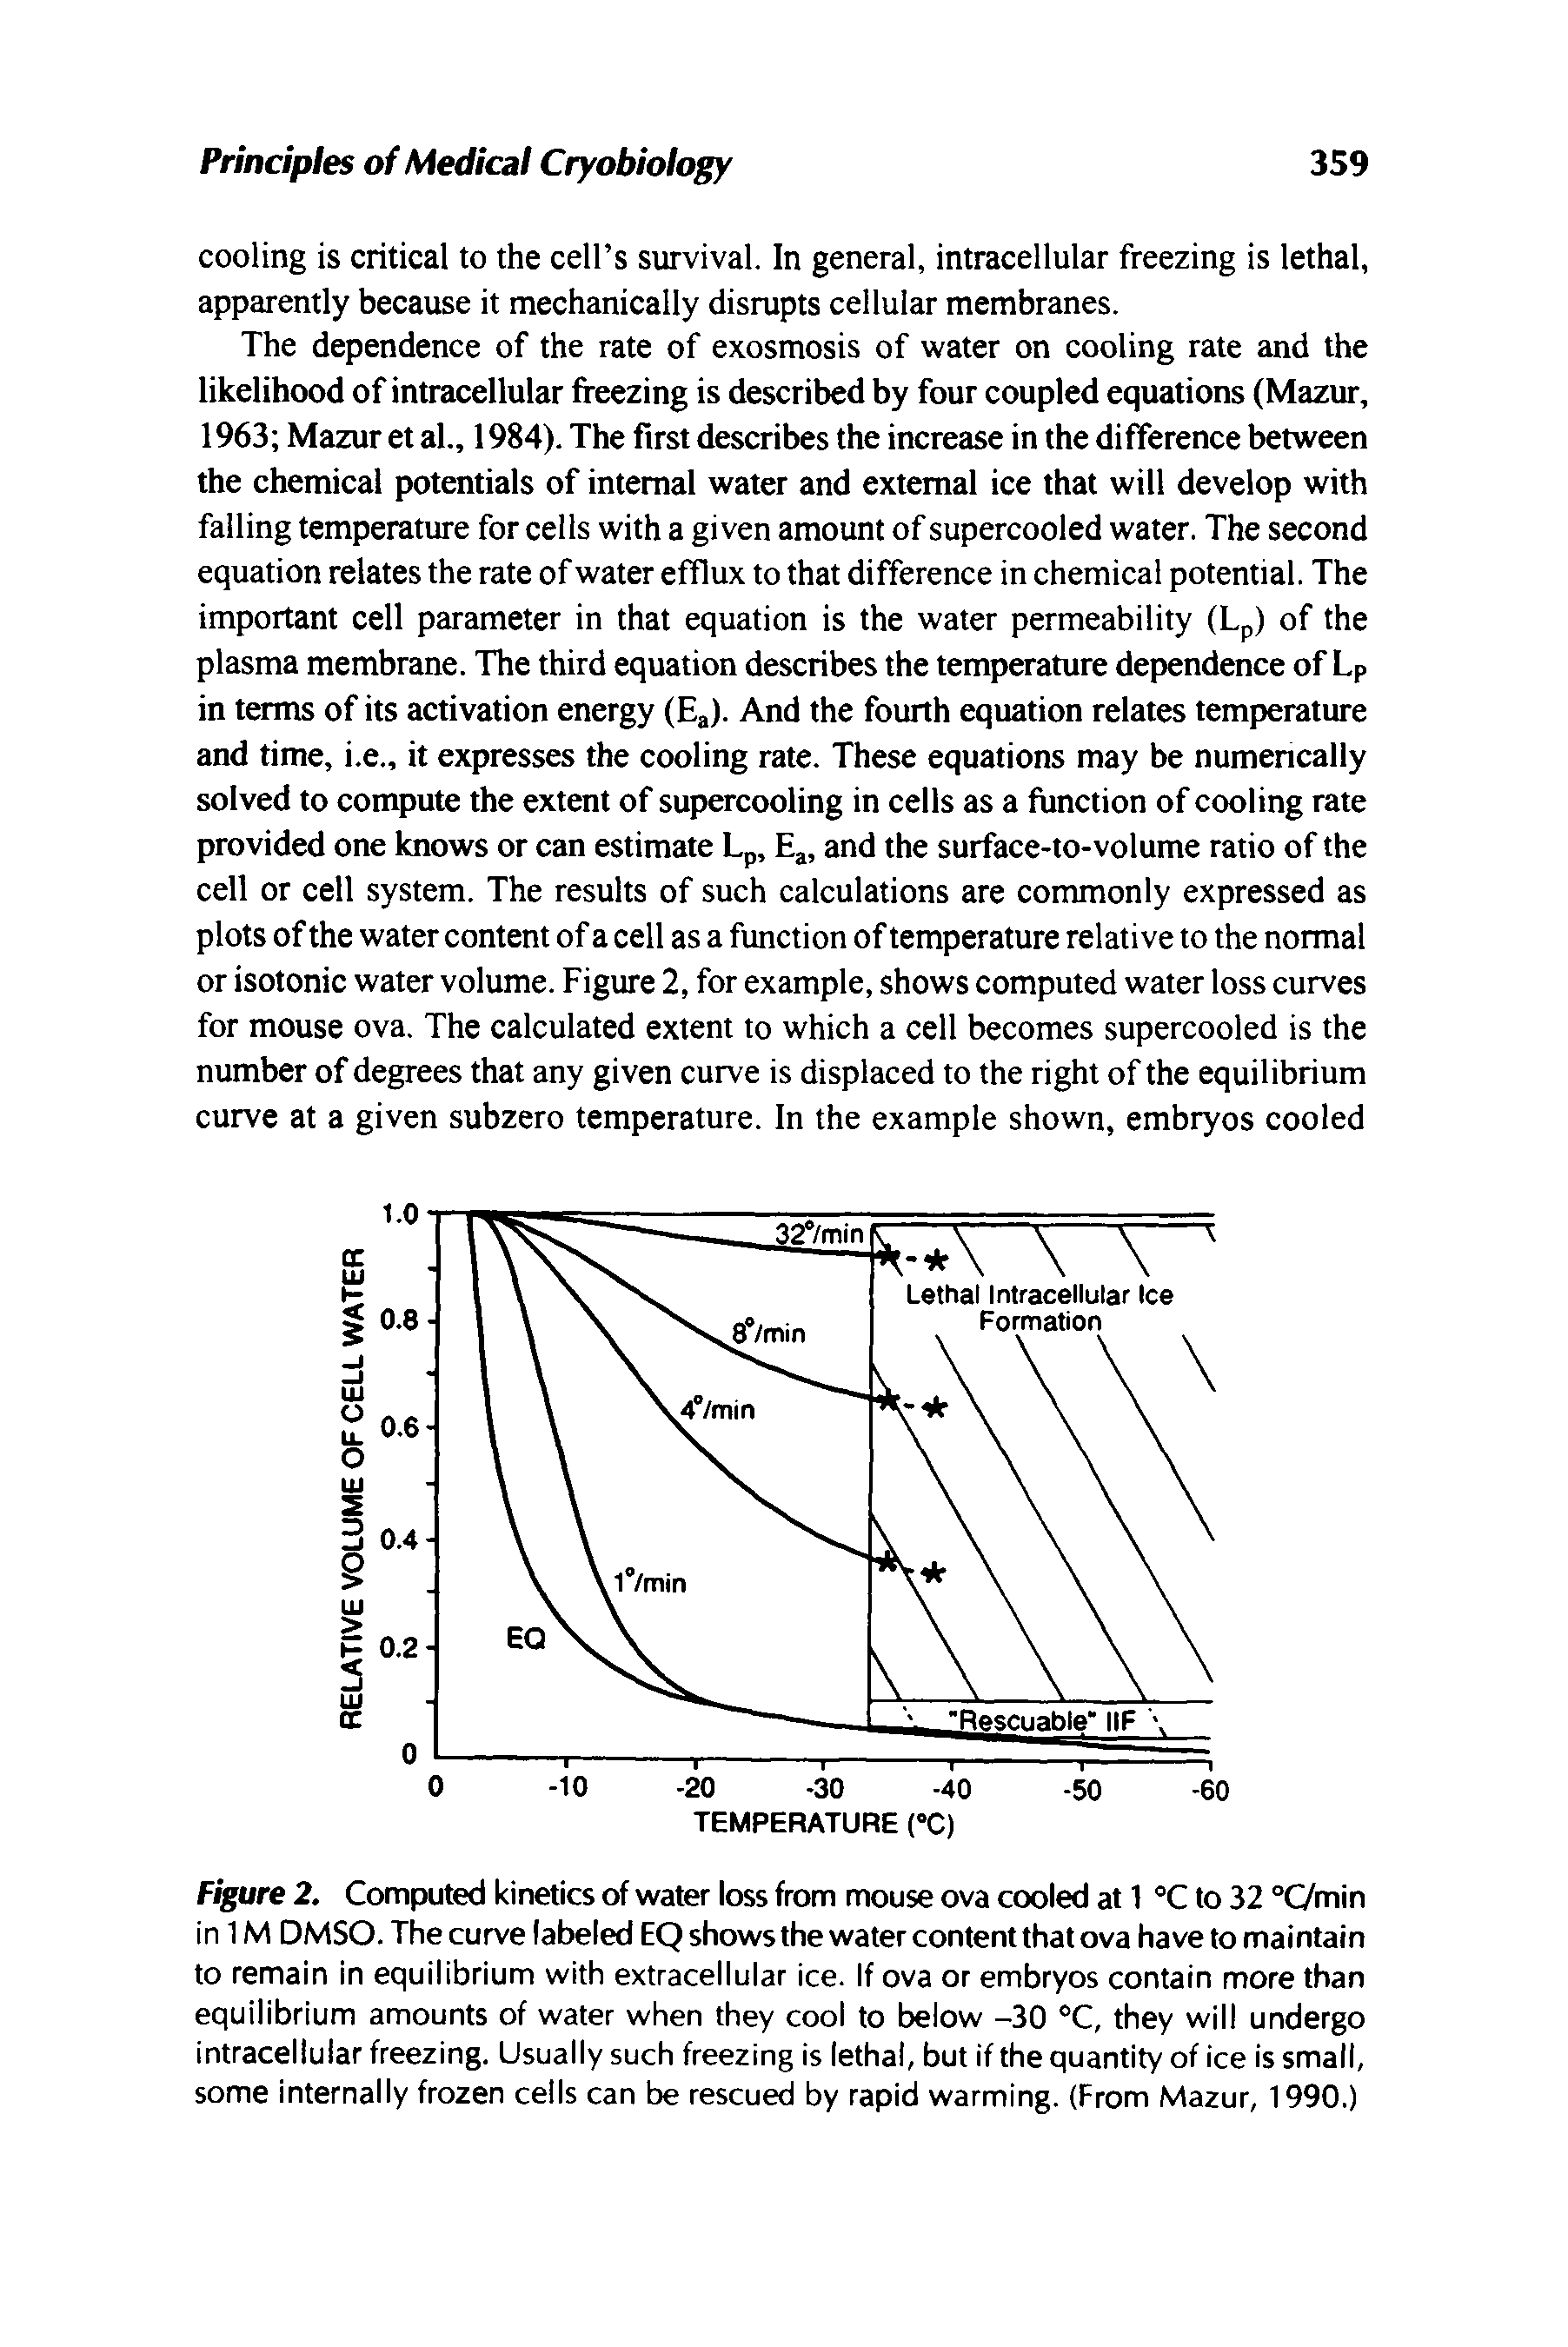 Figure 2. Computed kinetics of water loss from mouse ova cooled at 1 °C to 32 °C/min in 1M DMSO. The curve labeled EQ shows the water content that ova have to maintain to remain in equilibrium with extracellular ice. If ova or embryos contain more than equilibrium amounts of water when they cool to below -30 °C, they will undergo intracellular freezing. Usually such freezing is lethal, but if the quantity of ice is small, some internally frozen cells can be rescued by rapid warming. (From Mazur, 1990.)...